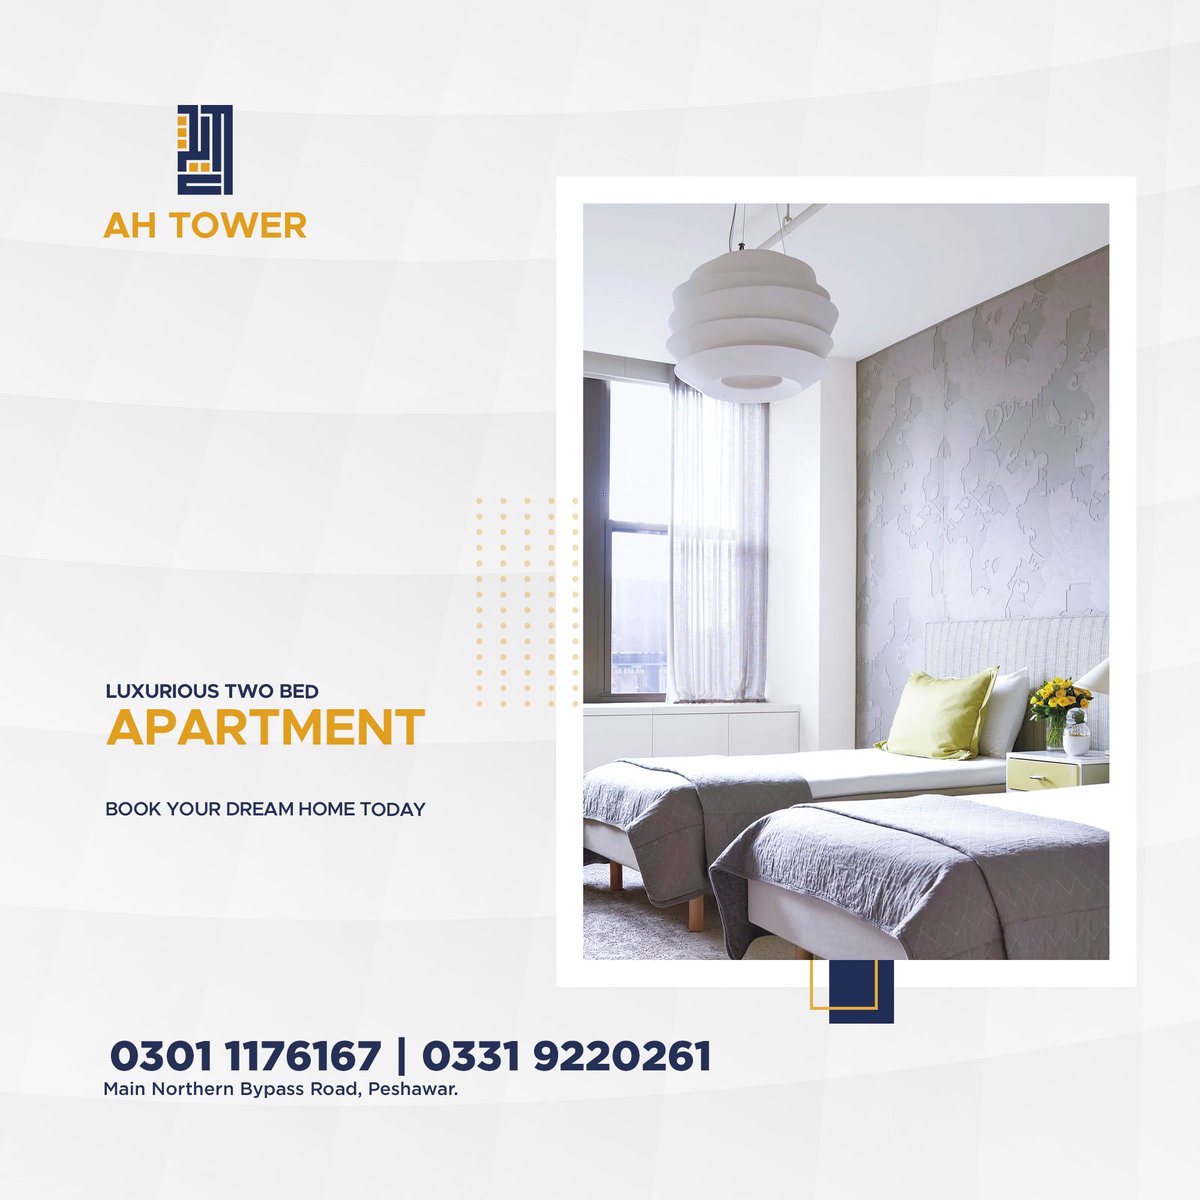 AH Tower offers the most luxurious apartments to make your living life a dream come true. Start your journey with us today and book your two or three bedroom apartment!
📞 0301-1176167 | 0331-9220261
✔️ TMA Approved
#AHTower #LuxuryForEveryone #ResidentialProperty #peshawar #KPK